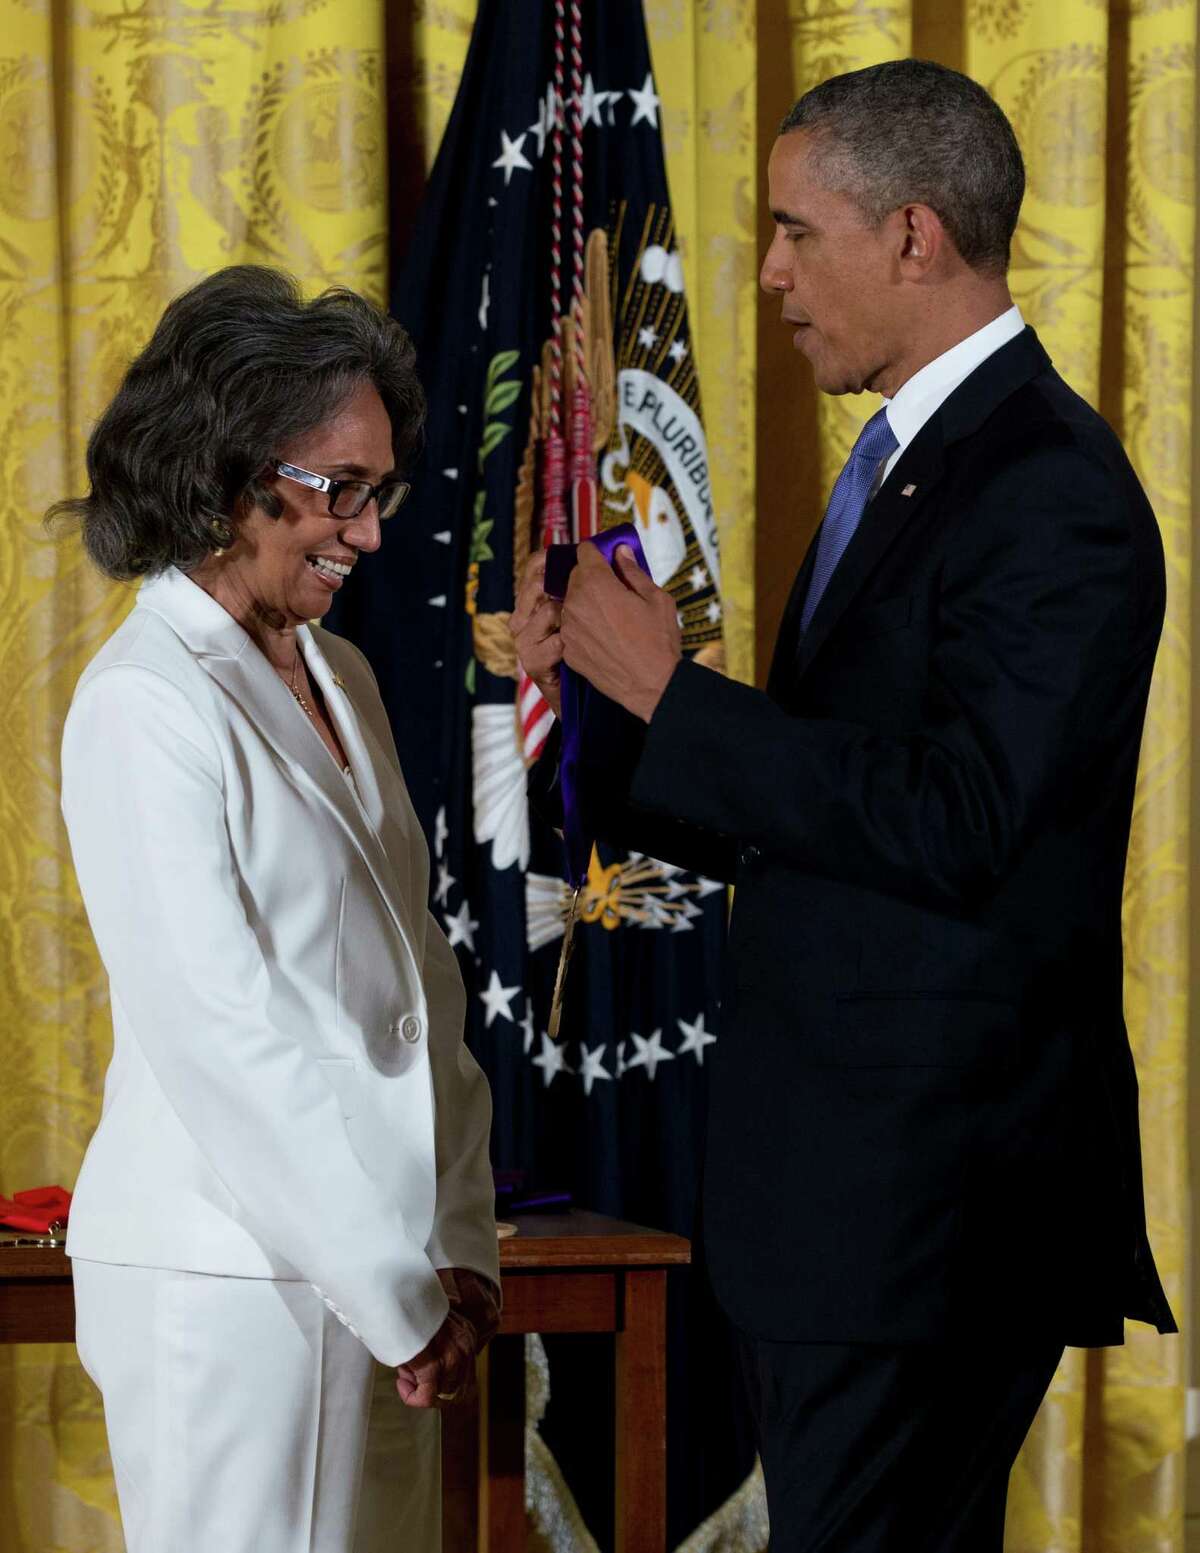 President Barack Obama awards Joan Myers Brown the 2012 National Medal of Arts, for her contributions as a dancer, choreographer, and artistic director, Wednesday, July 10, 2013, during a ceremony in the East Room of White House in Washington. (AP Photo/Carolyn Kaster